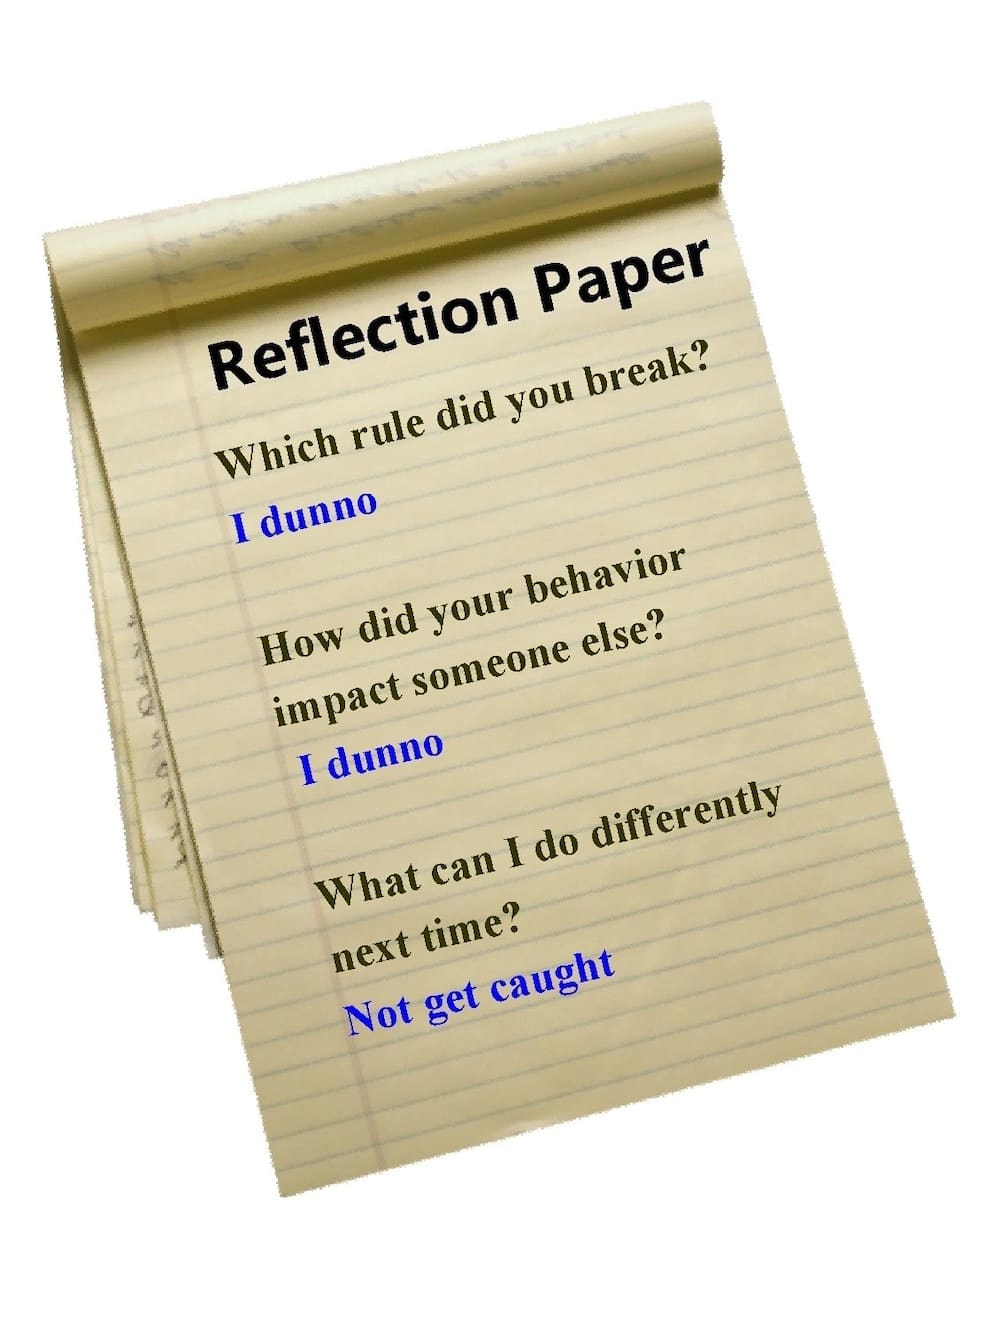 What is a reflection paper
Sample reflection paper
Reflection paper outline
Format of reflection paper
Example of a reflection paper